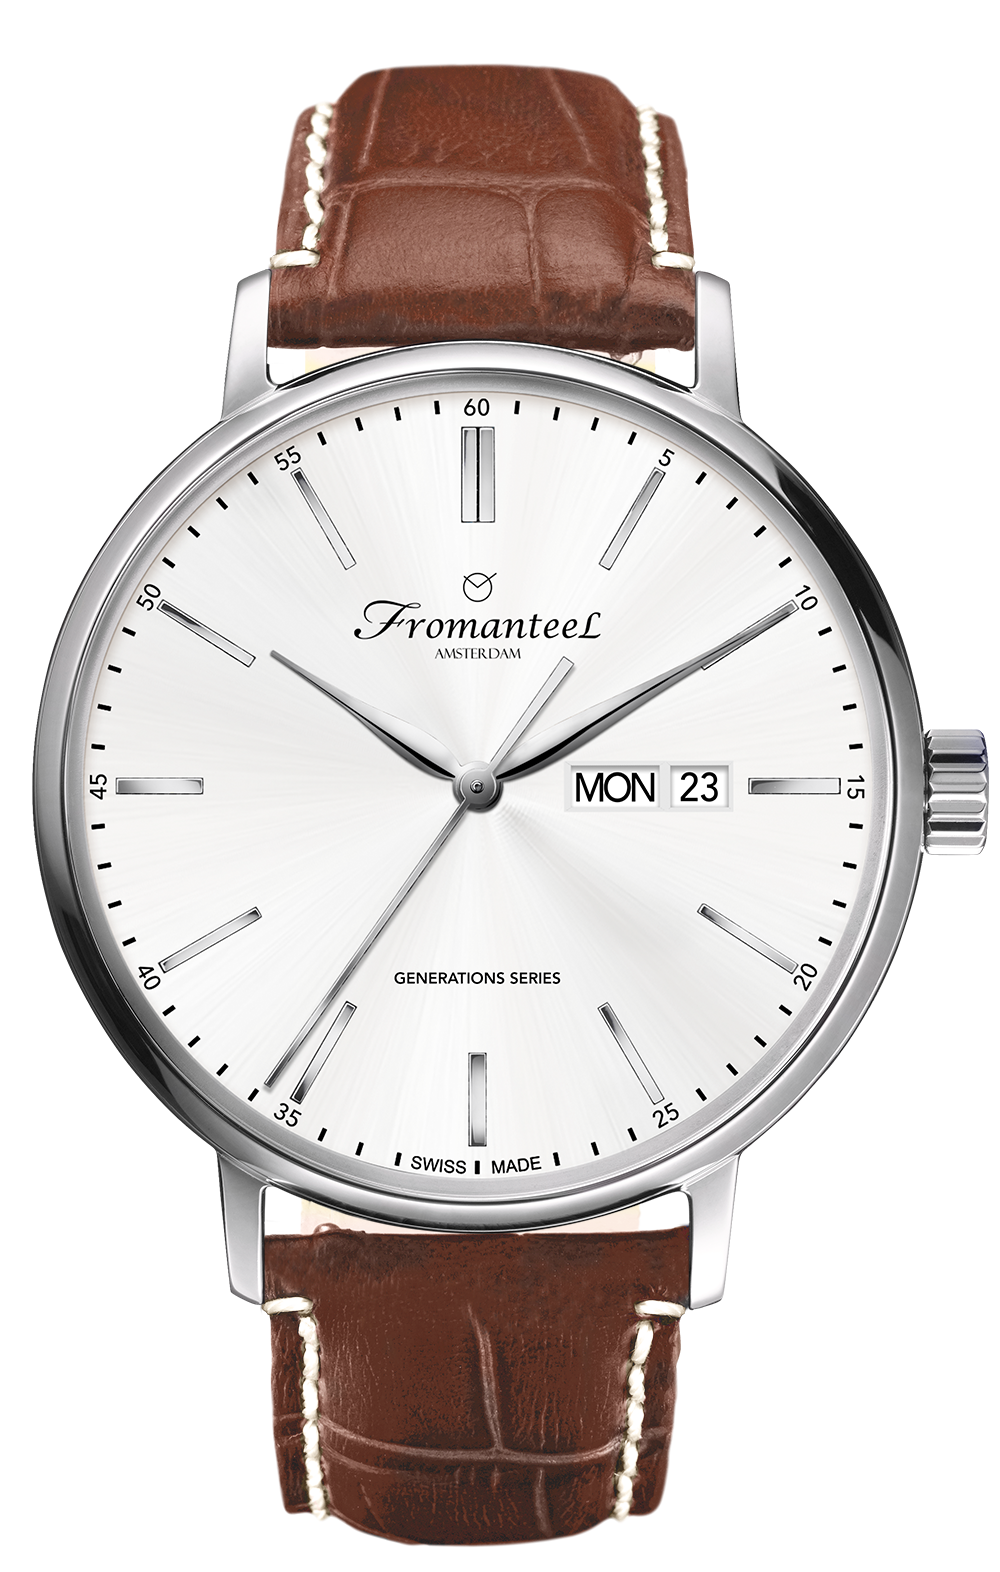 Swiss Made Men's Watch Fromanteel Generations Day-Date White